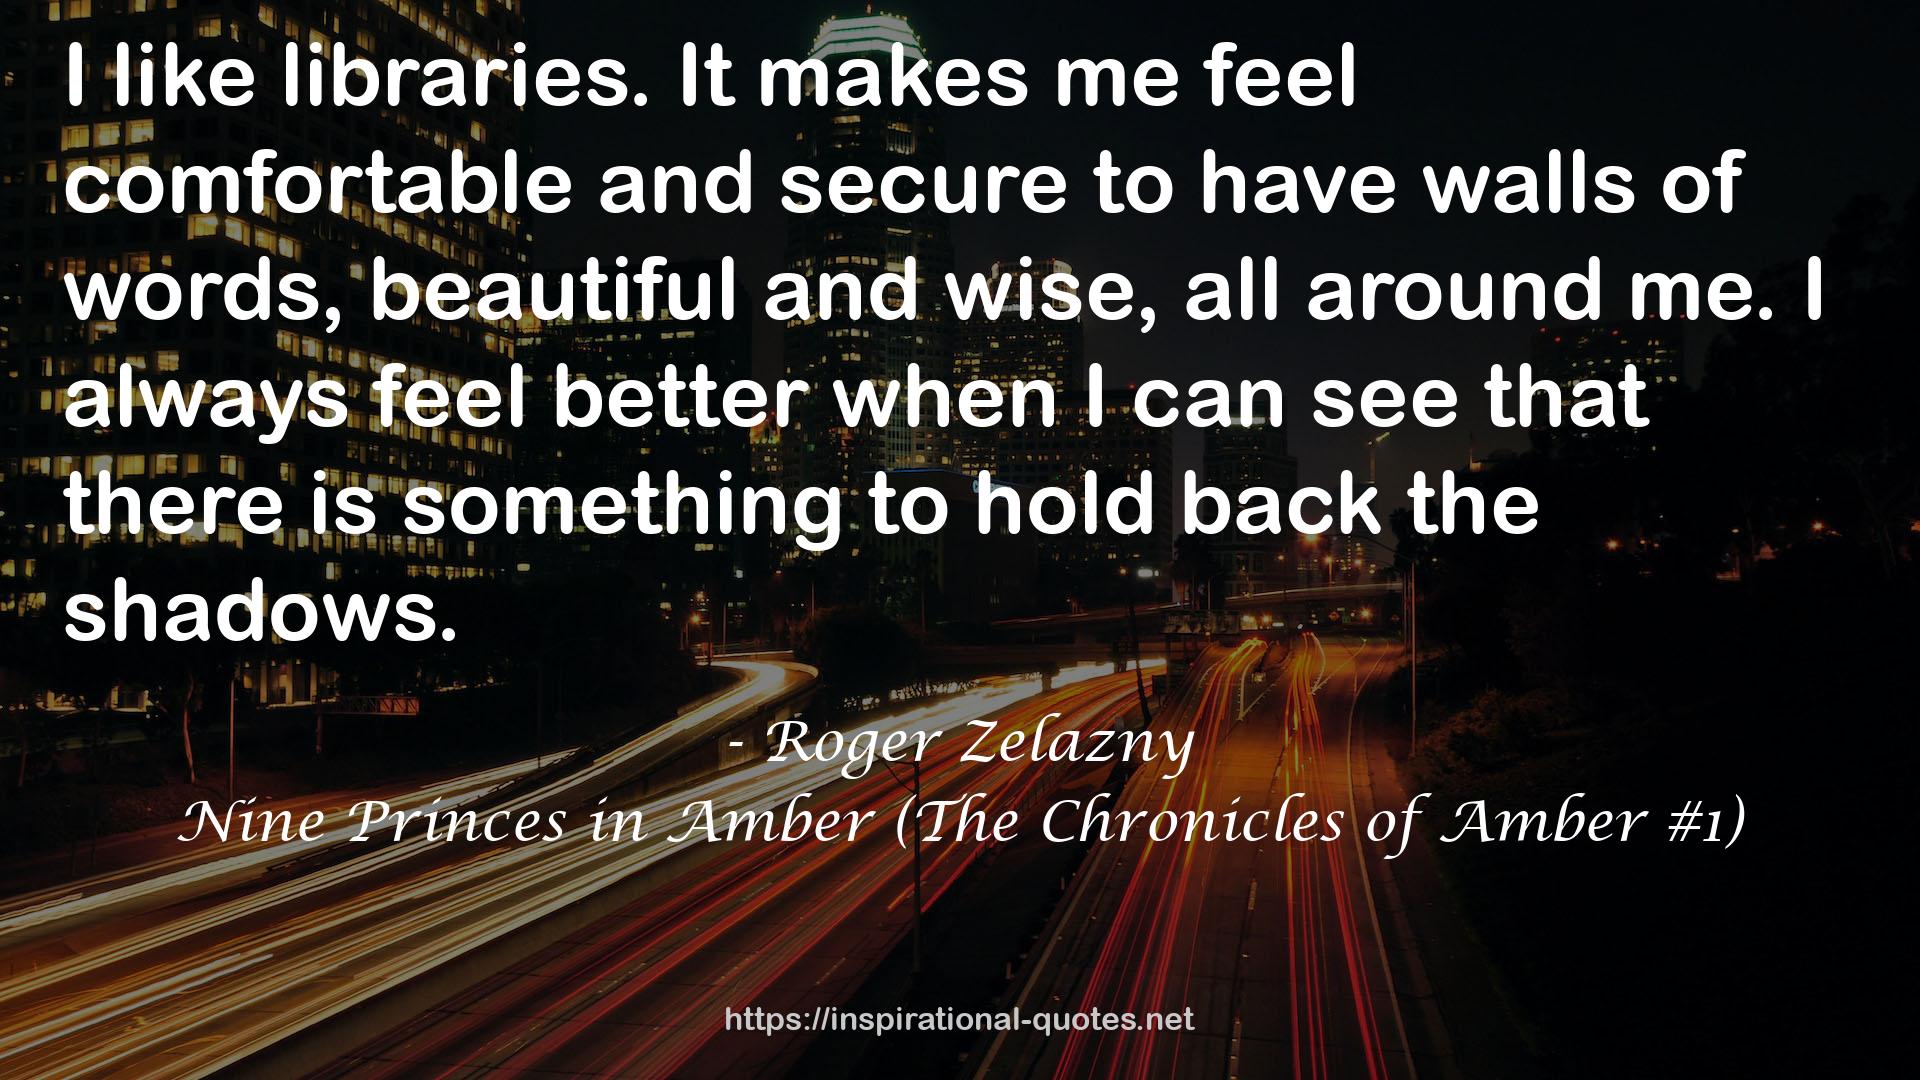 Nine Princes in Amber (The Chronicles of Amber #1) QUOTES